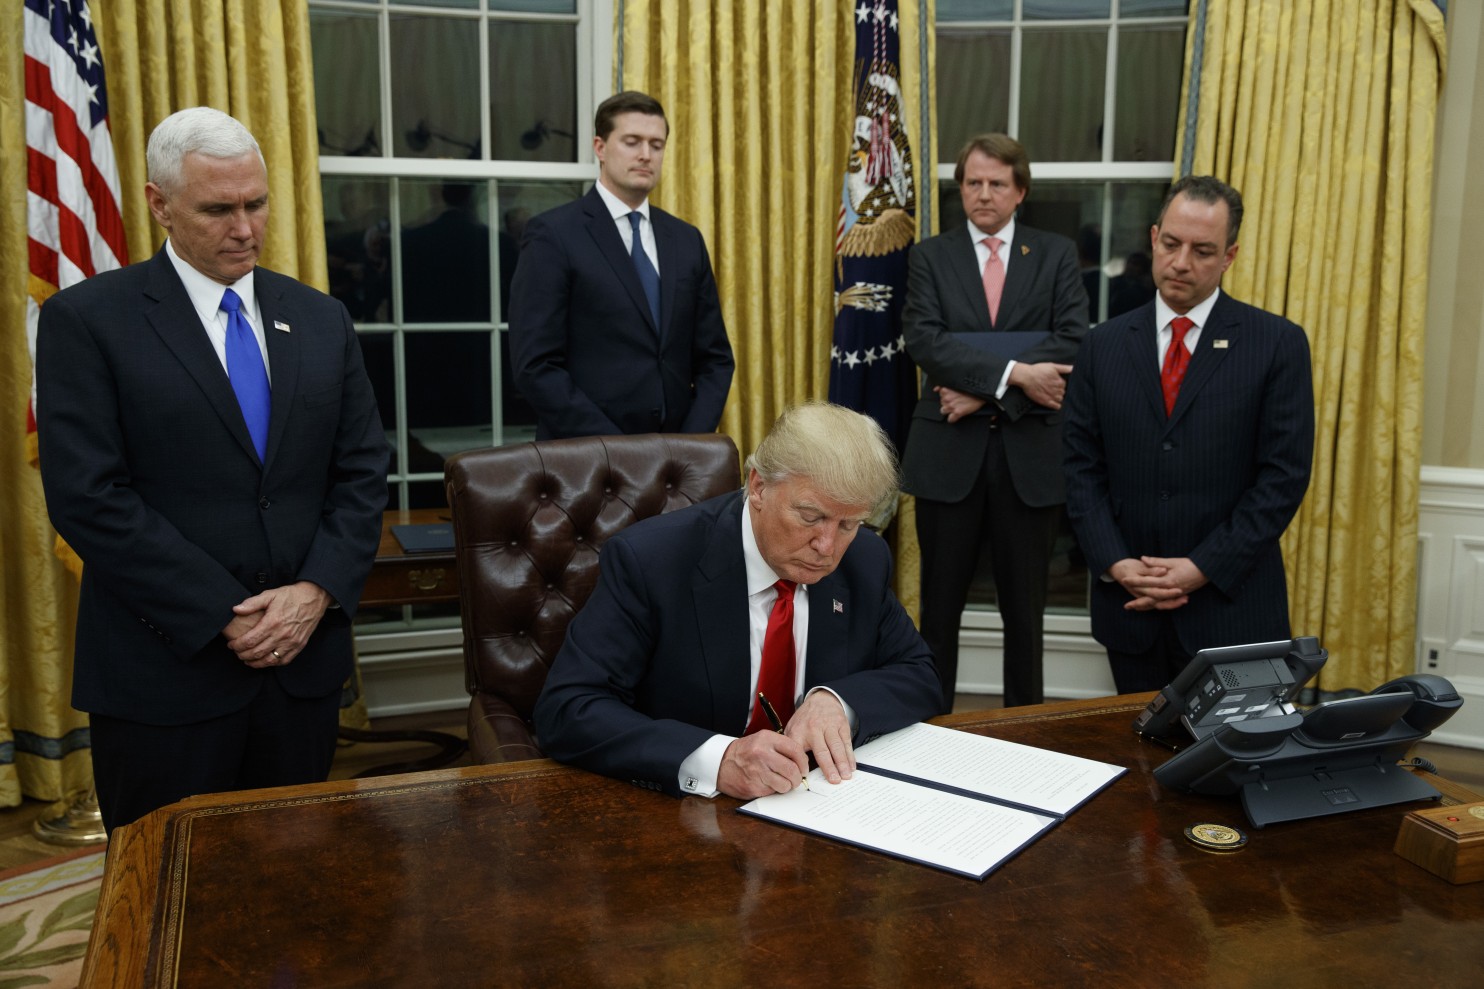 How Trump's Executive Order Impacts the Future of the Affordable Care Act